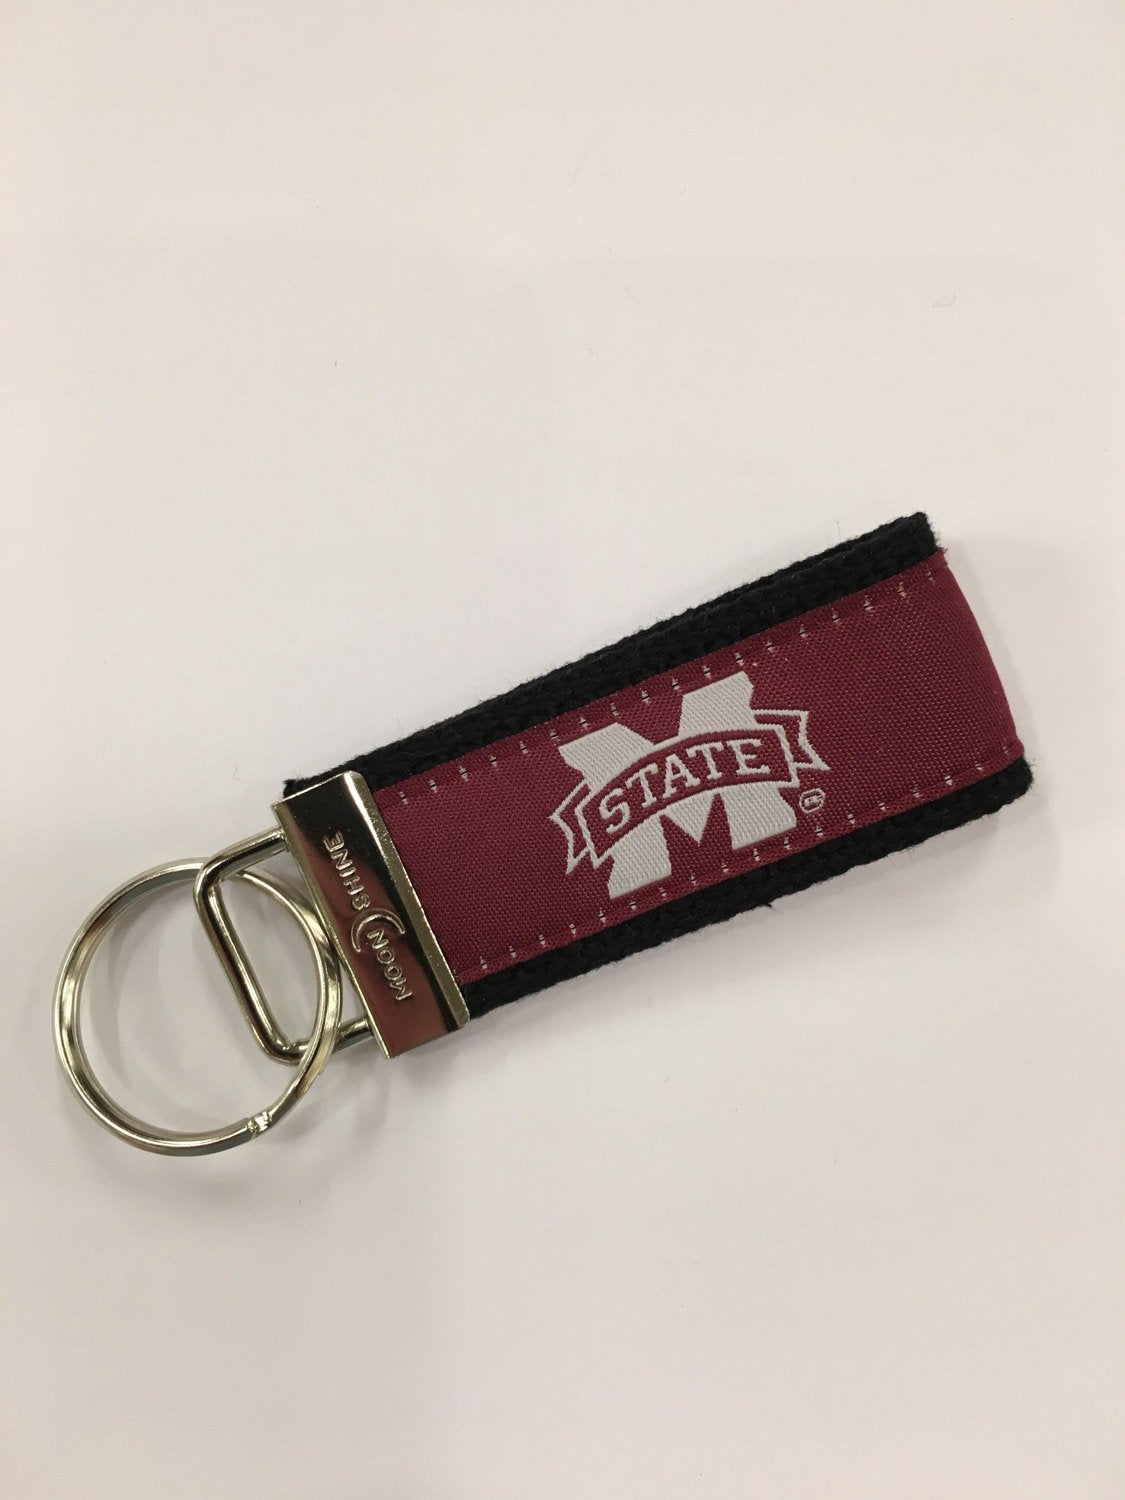 Mississippi State web key chains